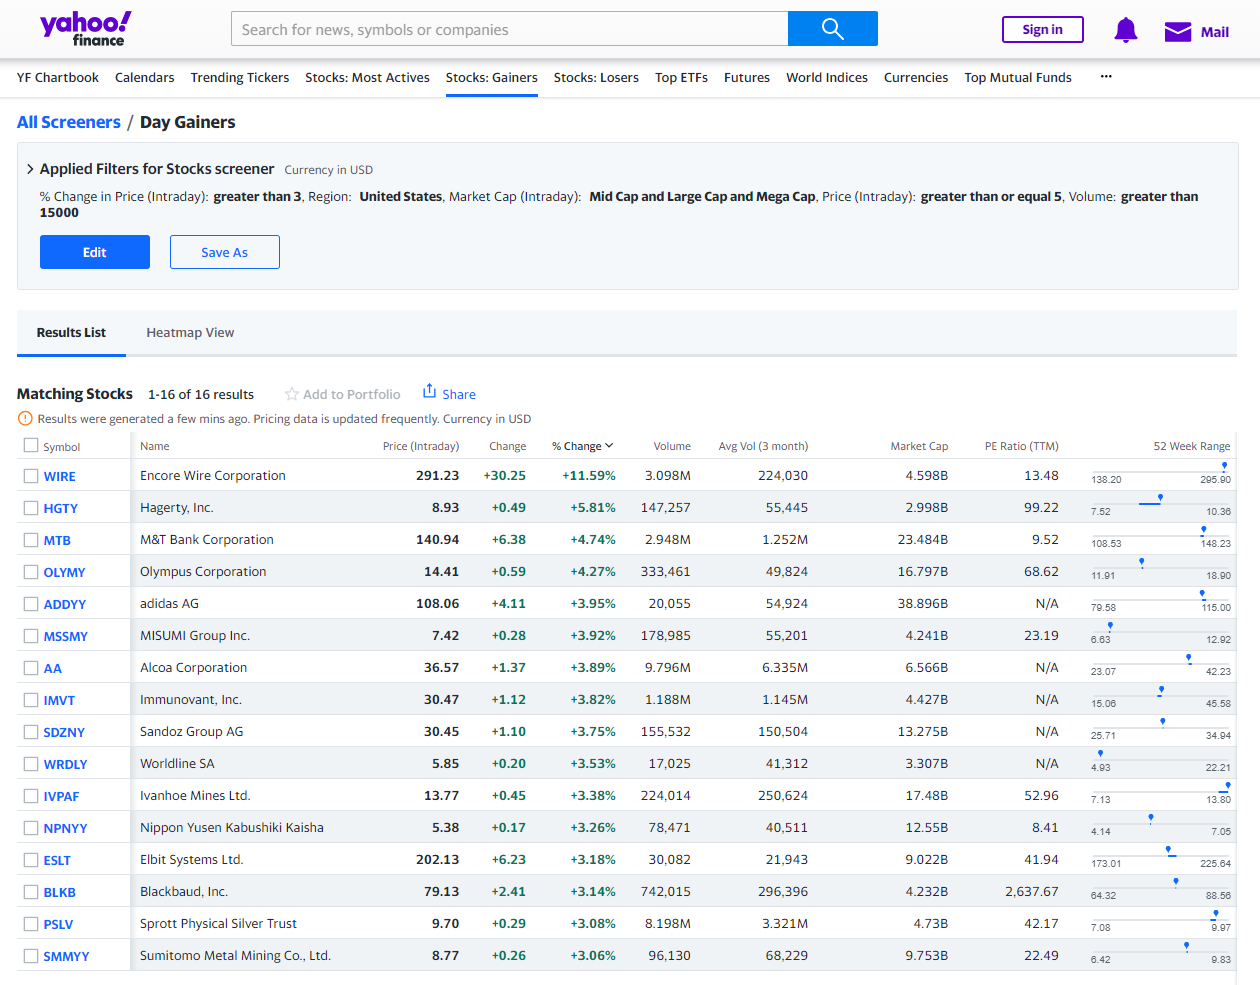 Ready-made list of stocks that are rated overvalued on Yahoo Finance